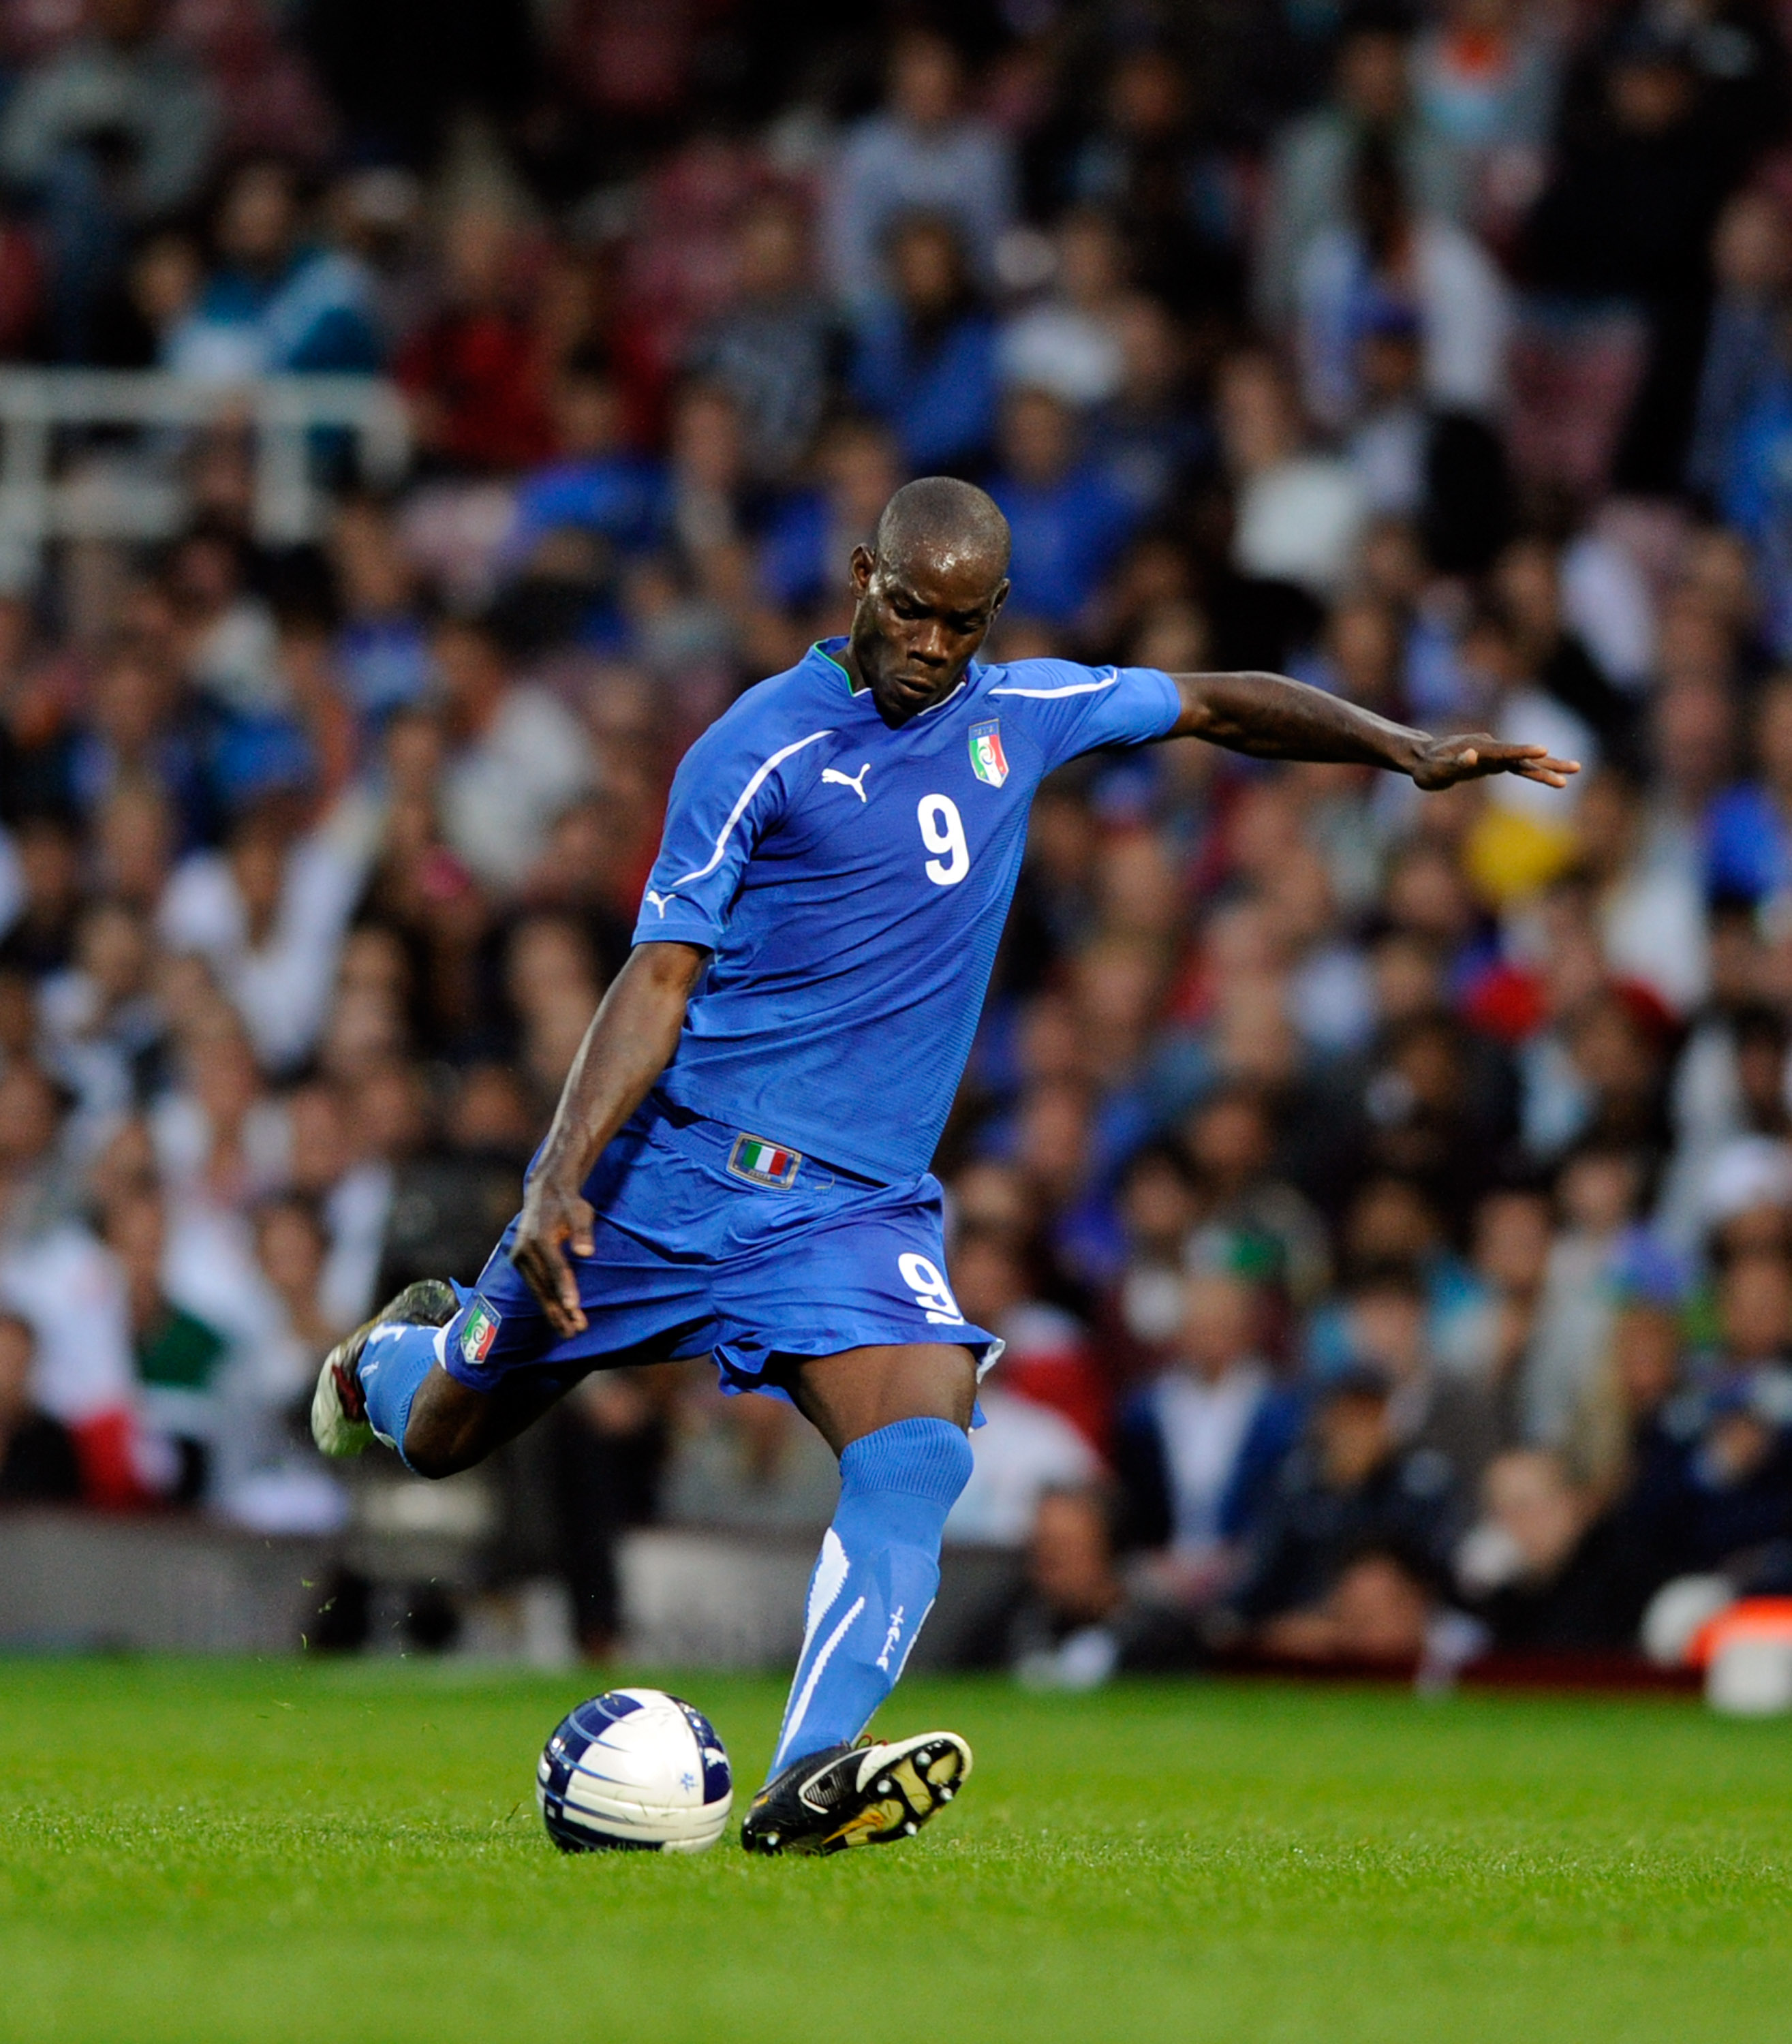 LONDON, ENGLAND - AUGUST 10:  Mario Balotelli of Italy in action during the international friendly match between Italy and Ivory Coast at The Boleyn Ground on August 10, 2010 in London, England.  (Photo by Claudio Villa/Getty Images)